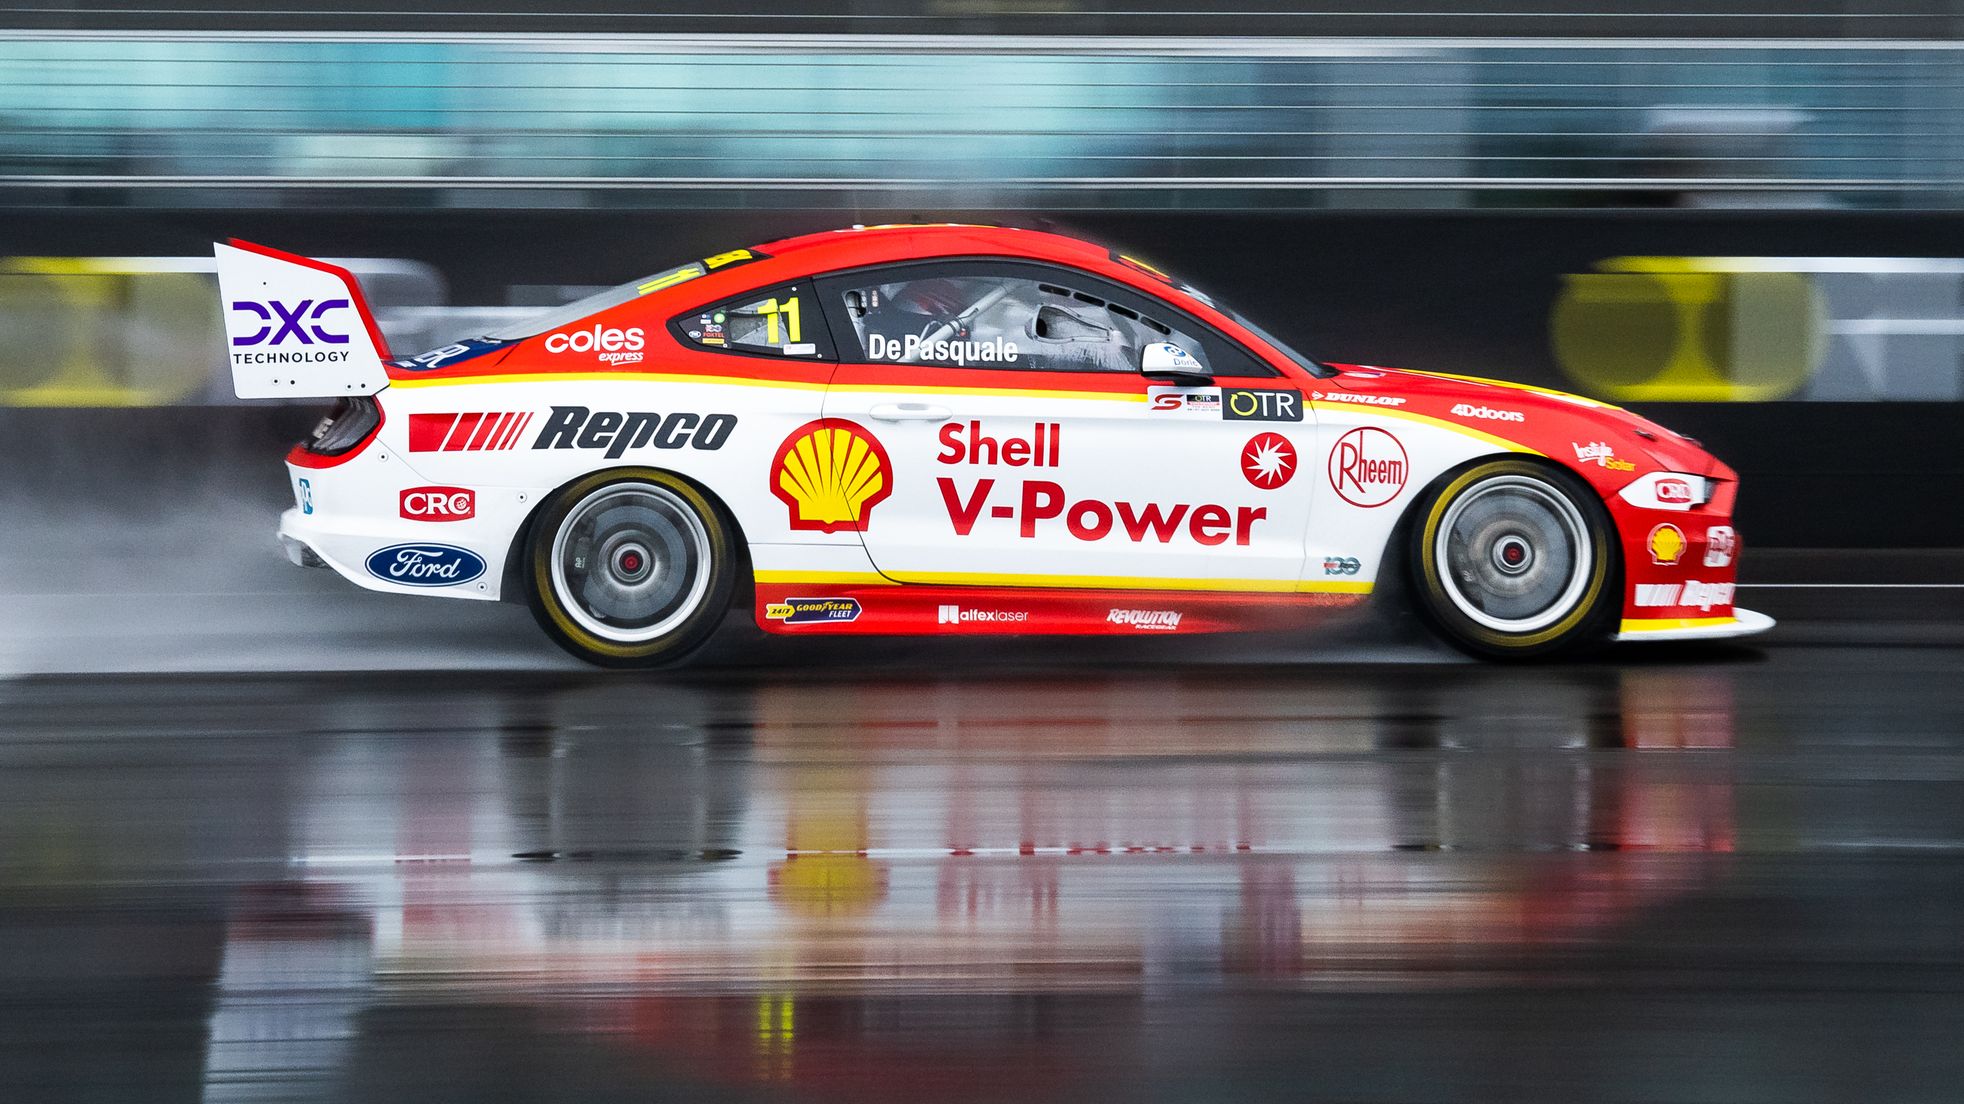 Anton de Pasquale driver of the #11 Shell V-Power Racing Ford Mustang during race 3 of the OTR Supersprint round of the 2022 Supercars Championship Season at The Bend on July 31, 2022 in Tailem Bend, Australia. (Photo by Daniel Kalisz/Getty Images)